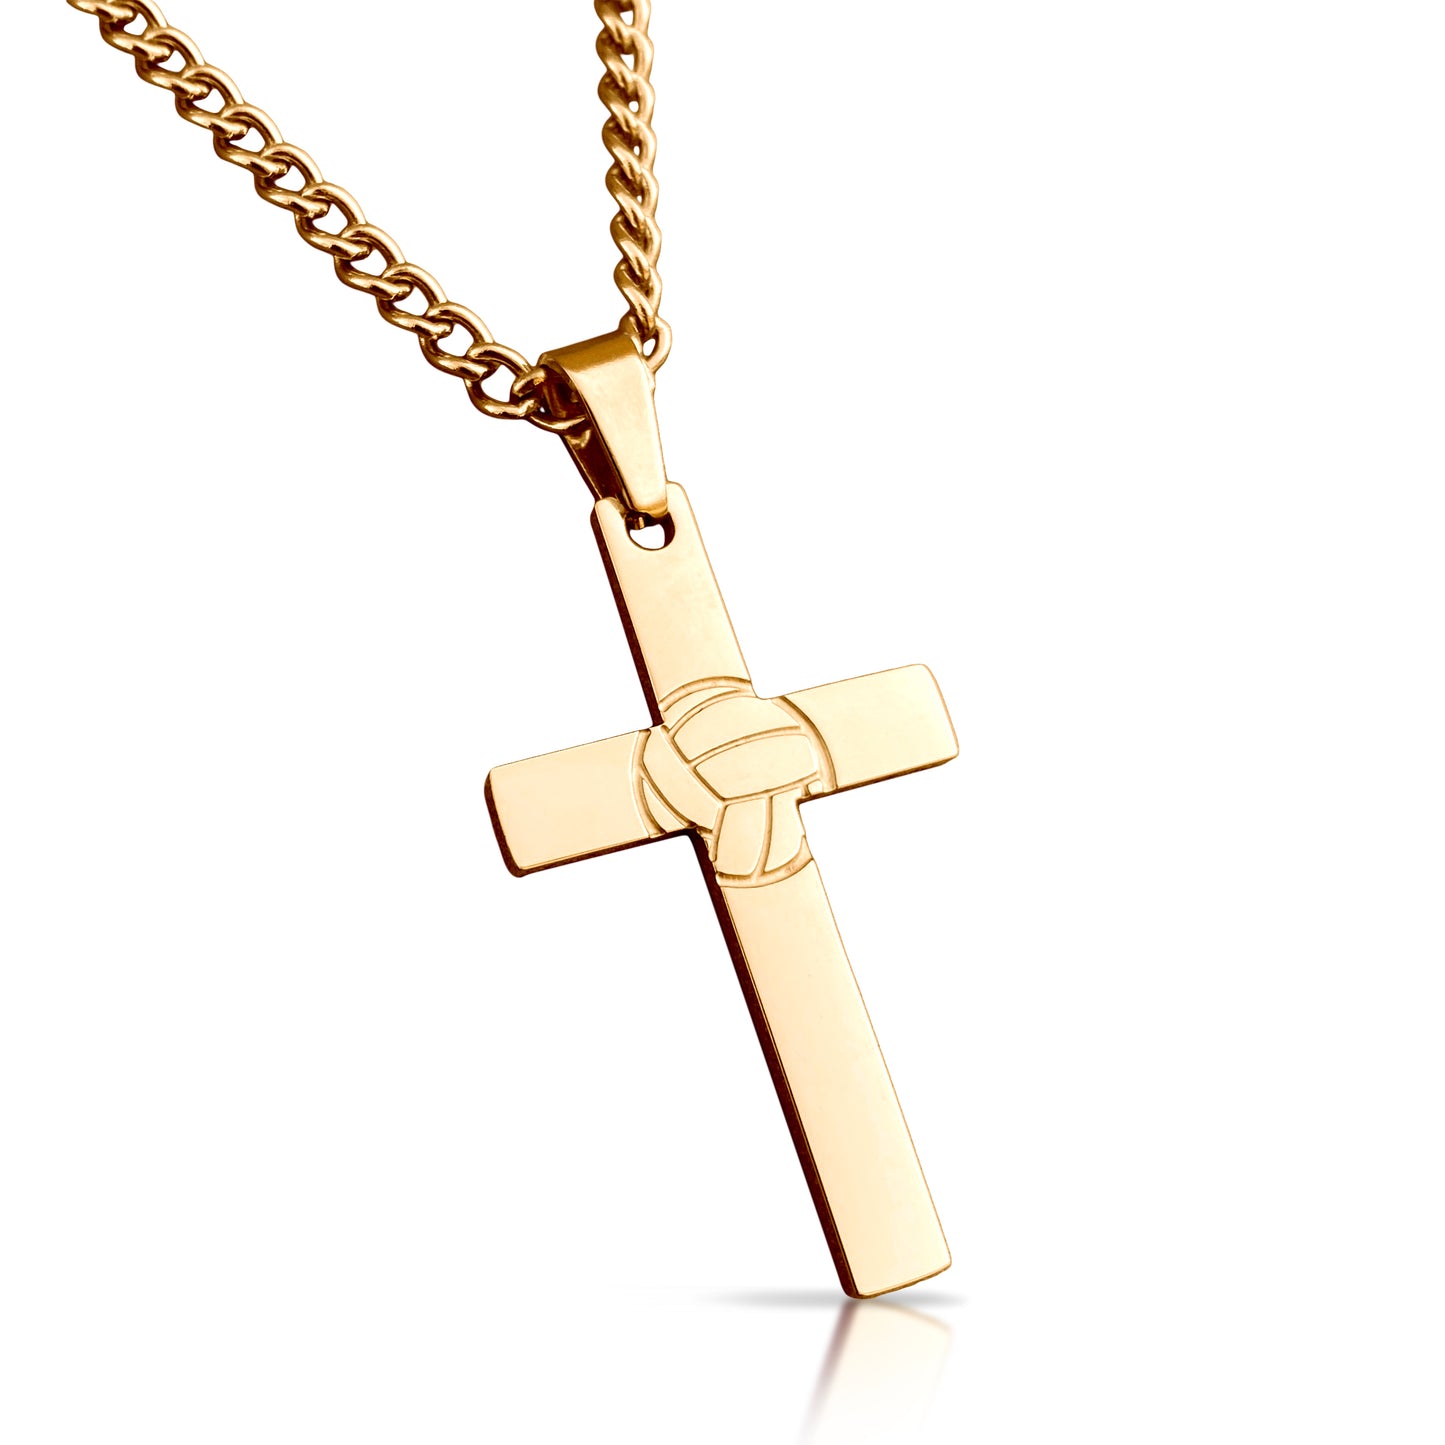 Volleyball Cross Pendant With Chain Necklace - 14K Gold Plated Stainless Steel